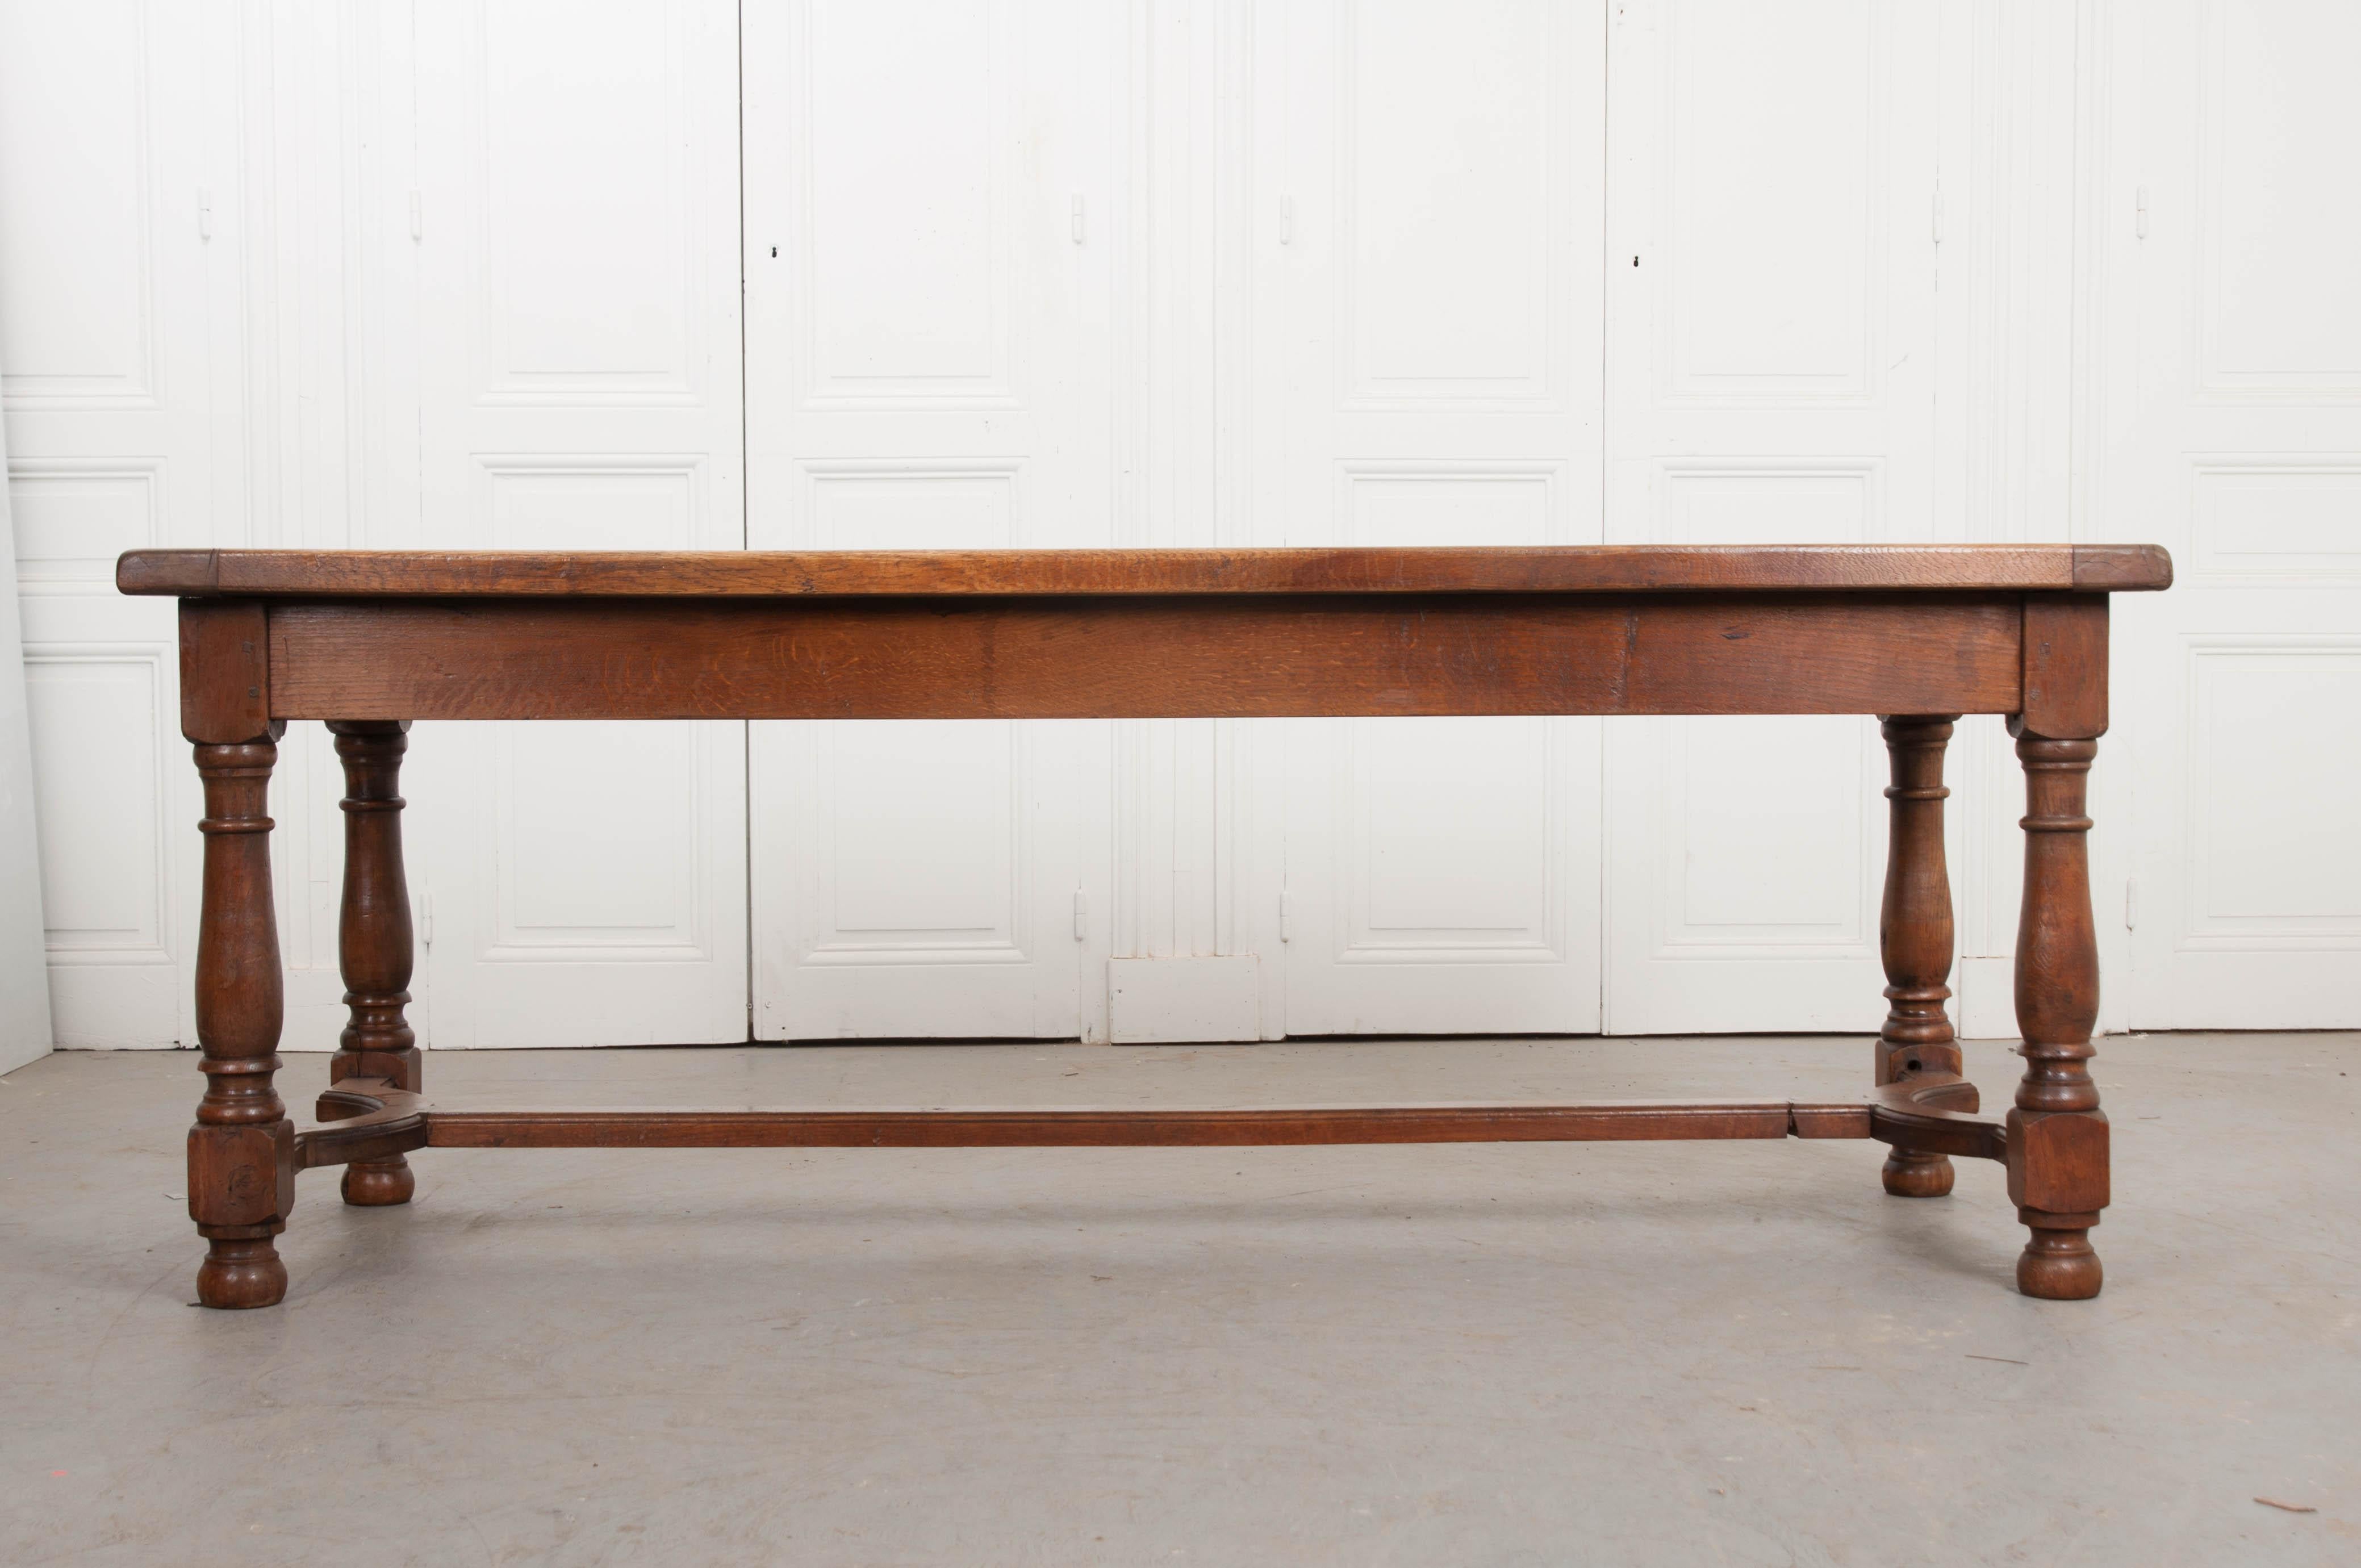 This beautiful oak farmhouse table, from late-19th century, France, features a top constructed of a single parquetry-inlaid panel with breadboards, over an apron with drawers, having cast iron ring pulls, on each end perfect for flatware and linen